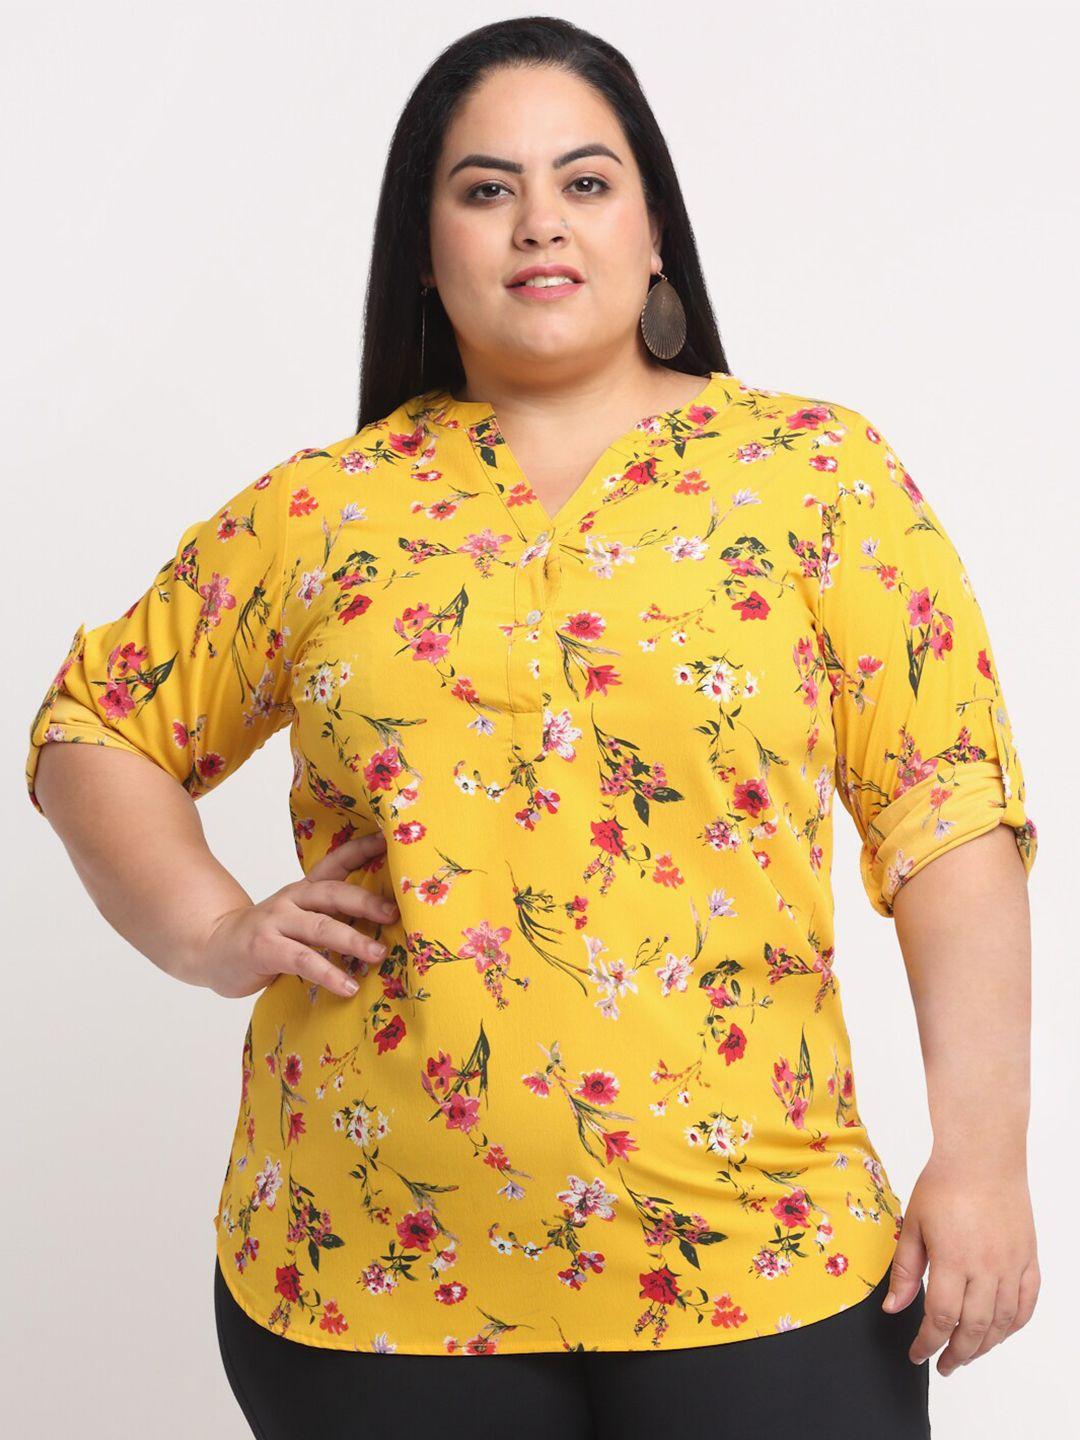 pluss-women-plus-size-mustard-yellow-&-pink-floral-print-collar-roll-up-sleeves-top